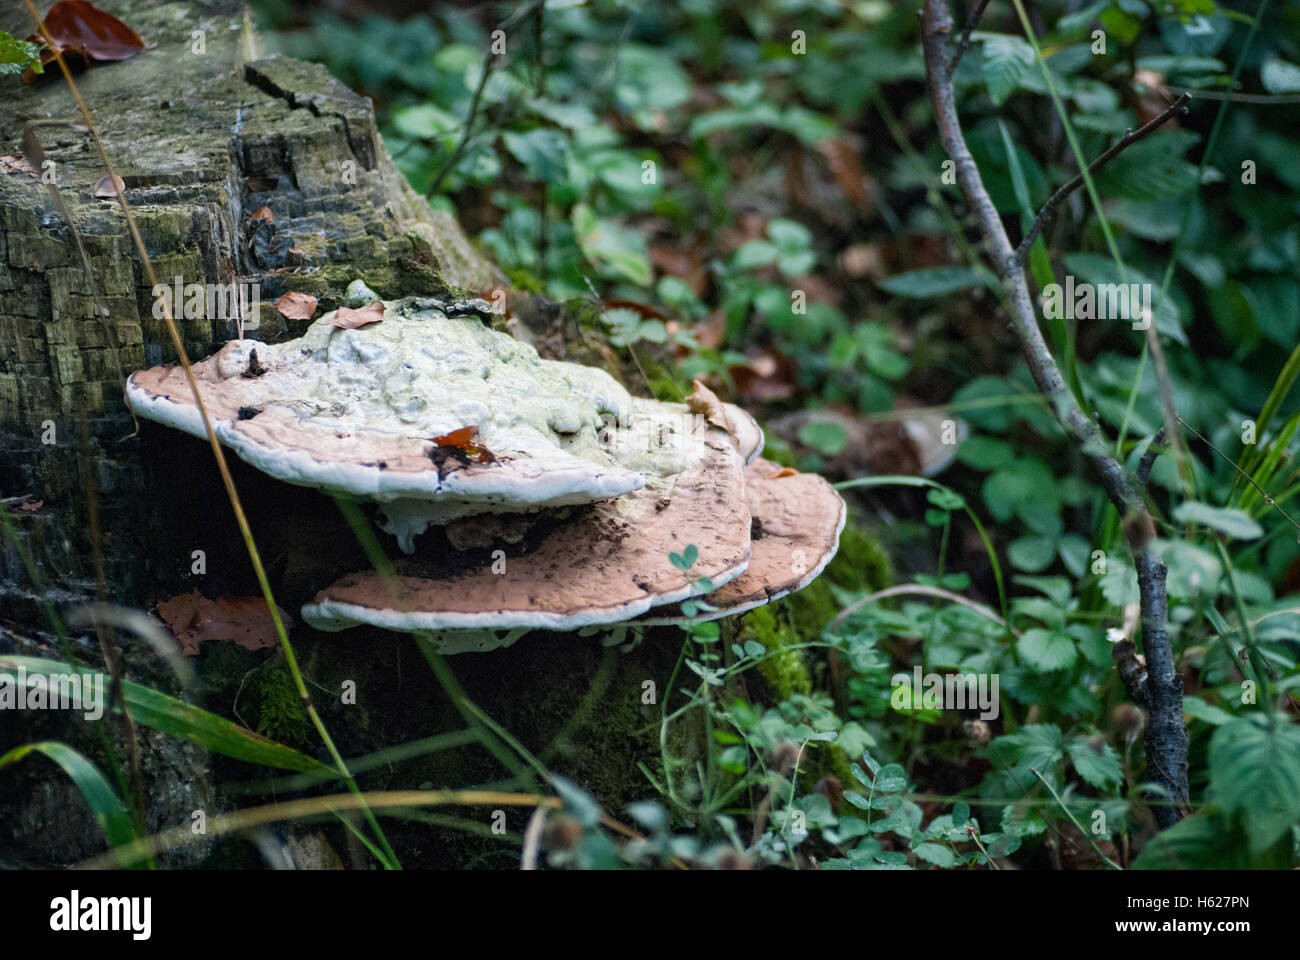 Lumpy bracket (Trametes gibbosa) fungi on a tree stump. Wood-decay fungus is a variety of fungus that digests moist wood. Stock Photo